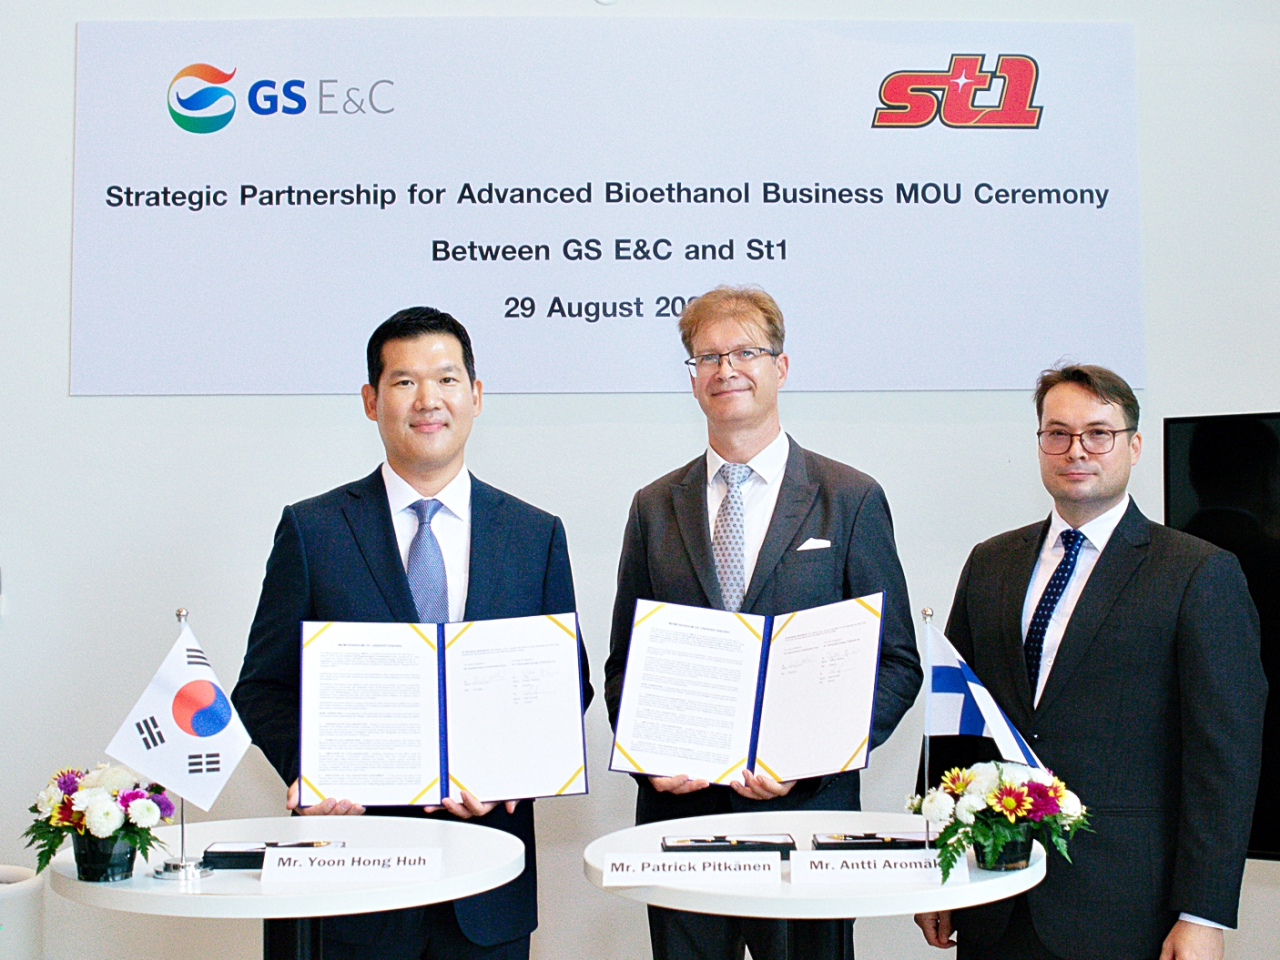 GS E＆C President Huh Yoon-hong (left), Patrick Pitkanen (center) and Antti Aromaki pose for a photo after signing a memorandum of understanding for technological cooperation on Monday in Bangkok. (GS E&C)